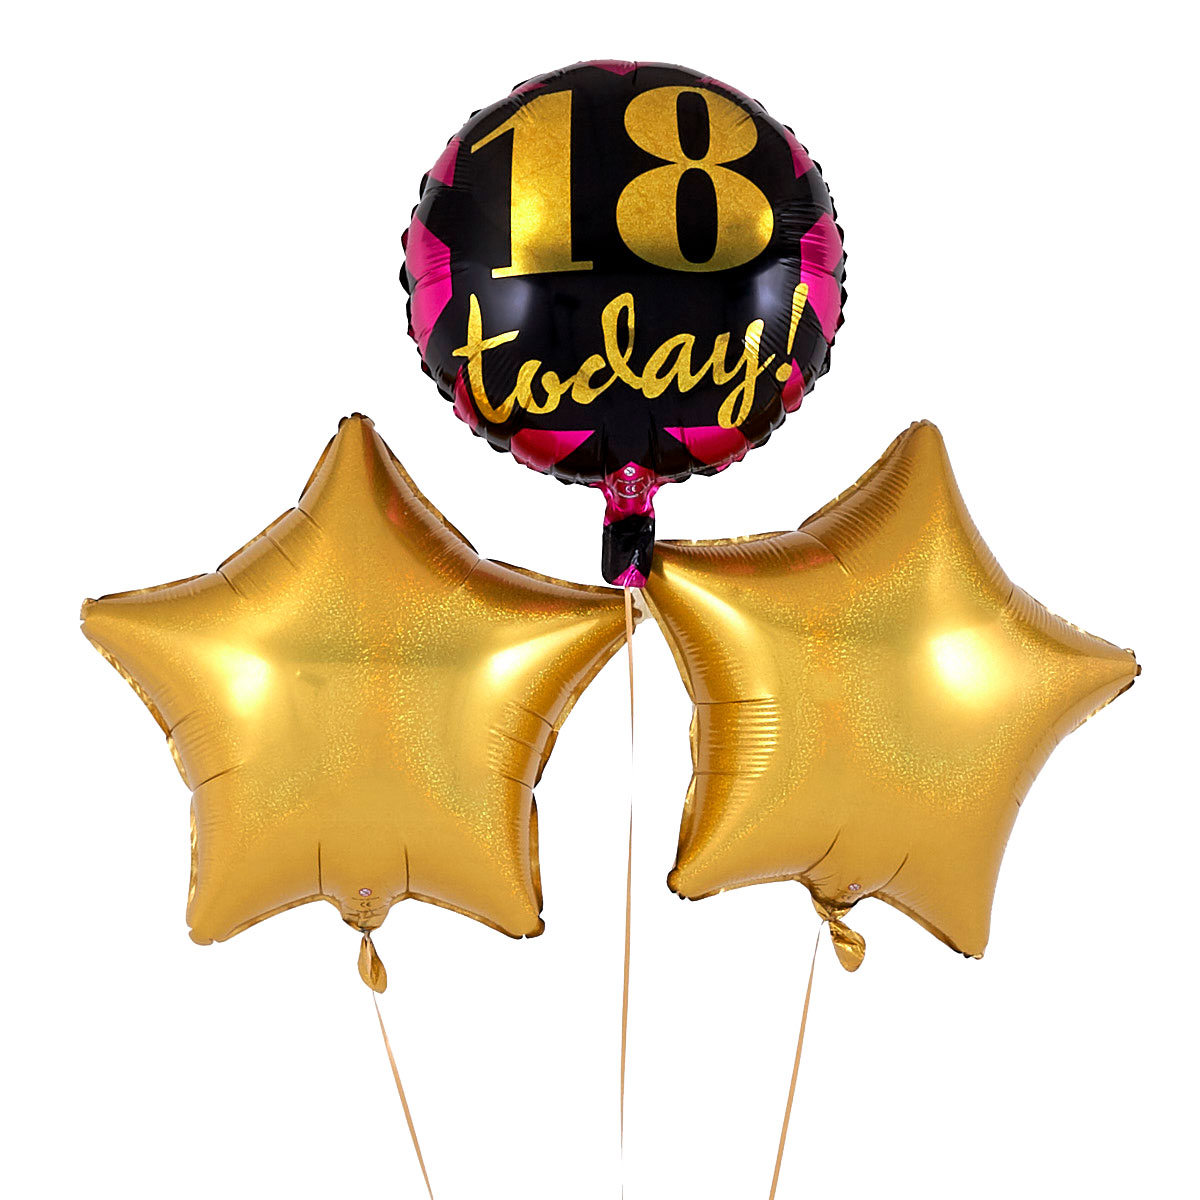 18 Today' Pink, Black & Gold Balloon Bouquet - DELIVERED INFLATED!